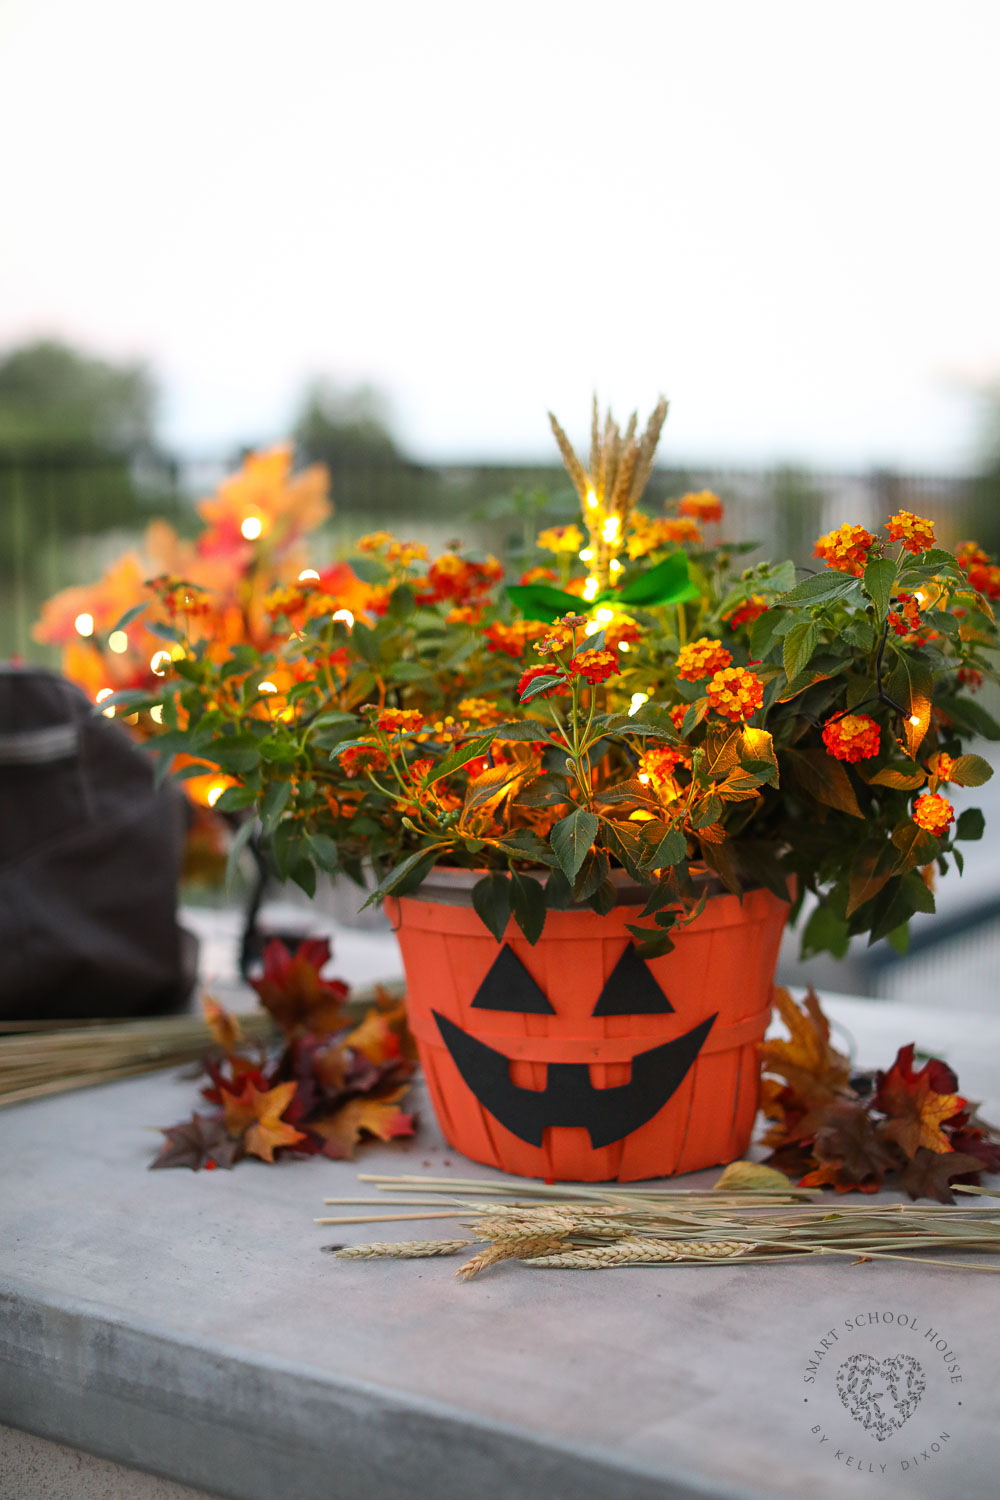 DIY Halloween Pumpkin Planter with orange flowers and glowing lights! How to make a Jack-O-Lantern planter basket with this fall craft idea!